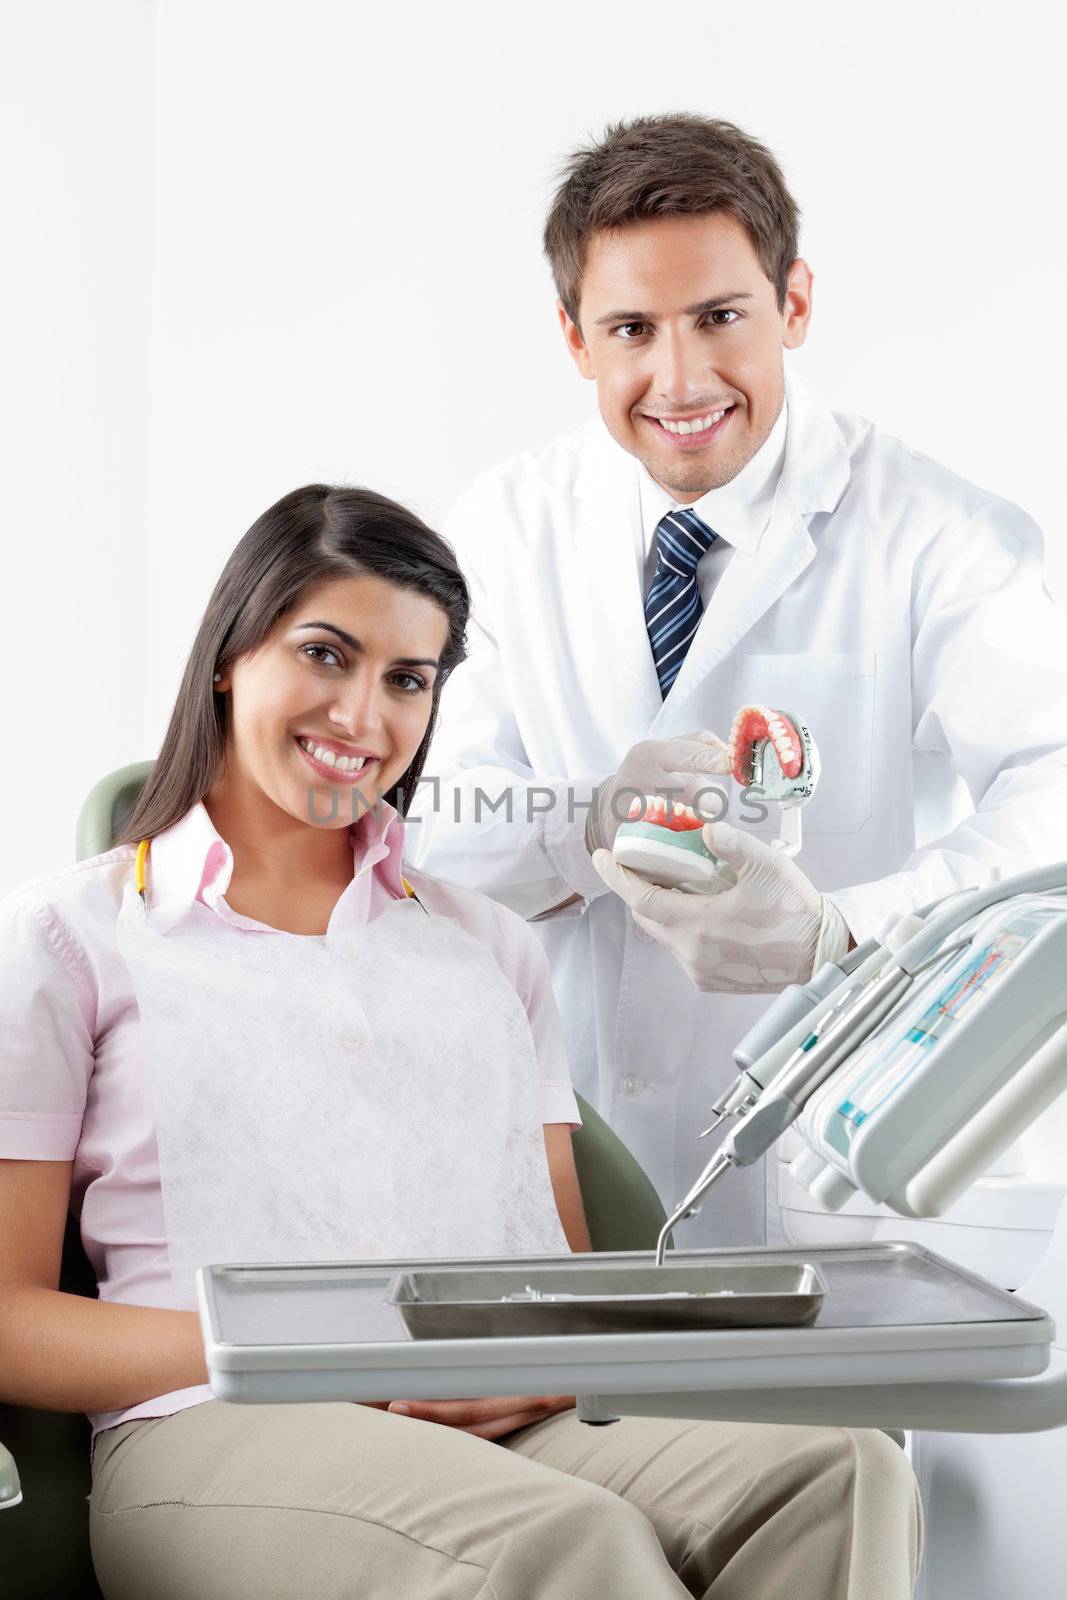 Dentist And Patient With Teeth Model In Clinic by leaf